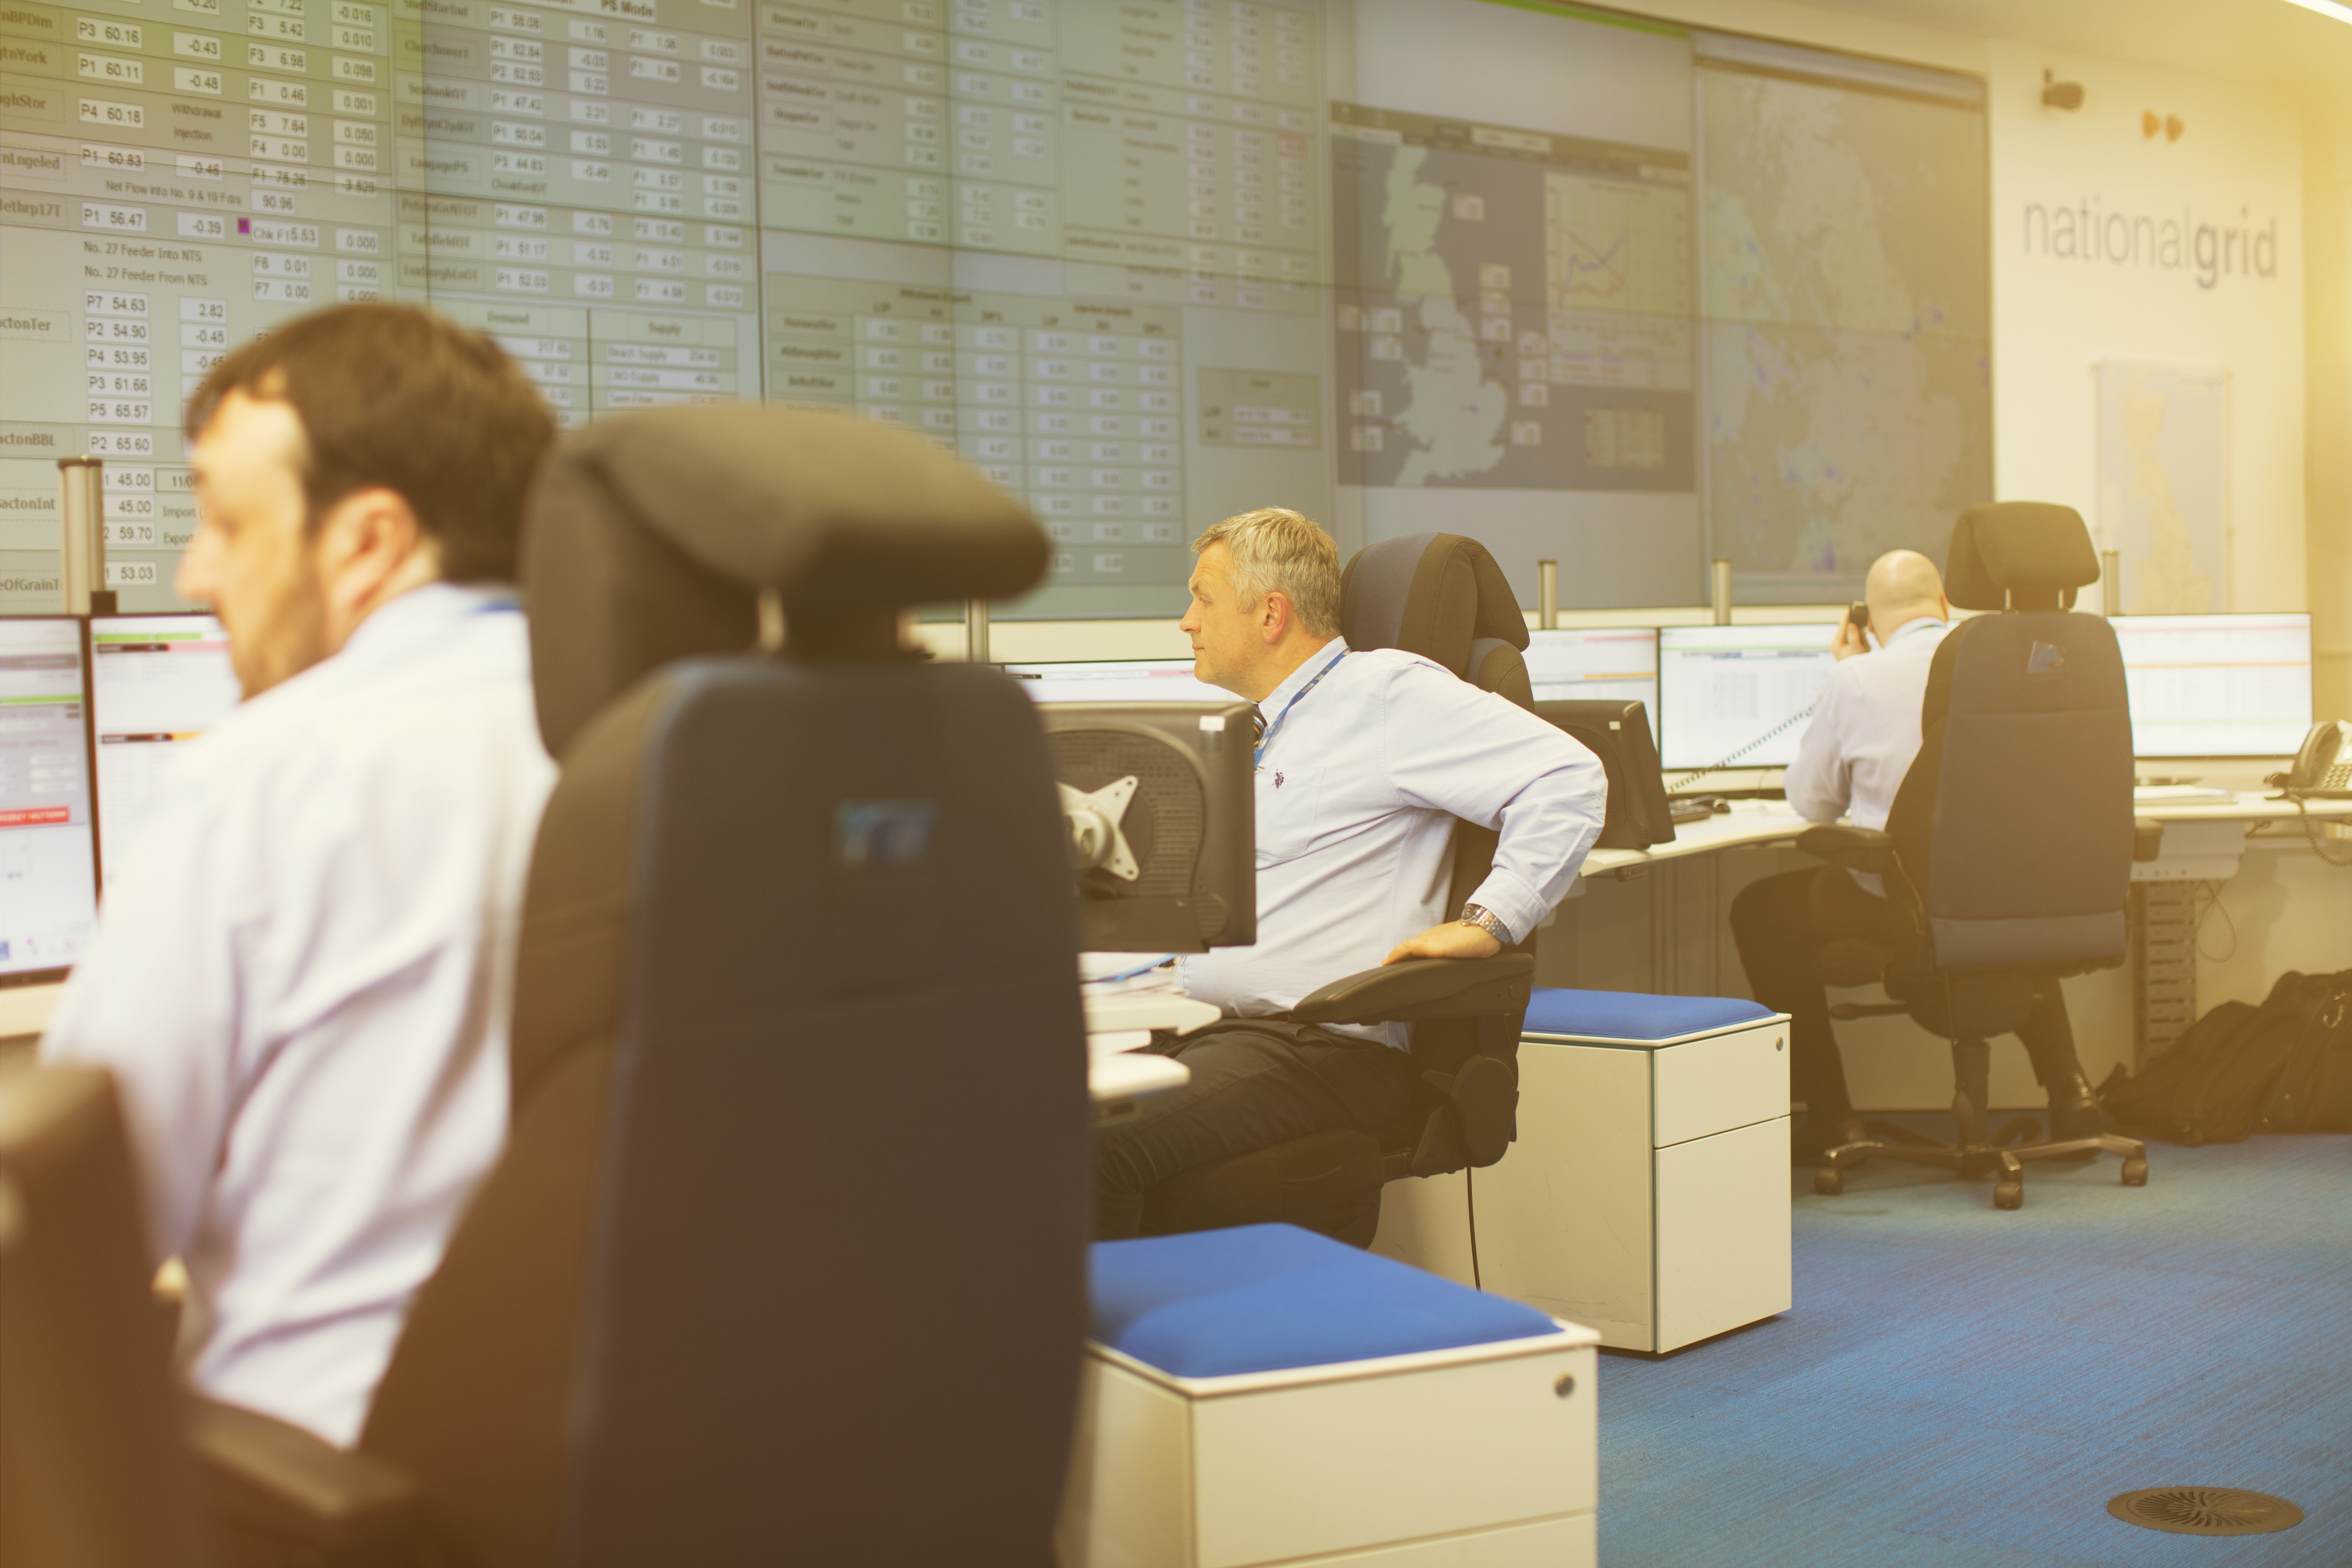 National Grid employees looking at data screens in a Gas National Control Centre office 